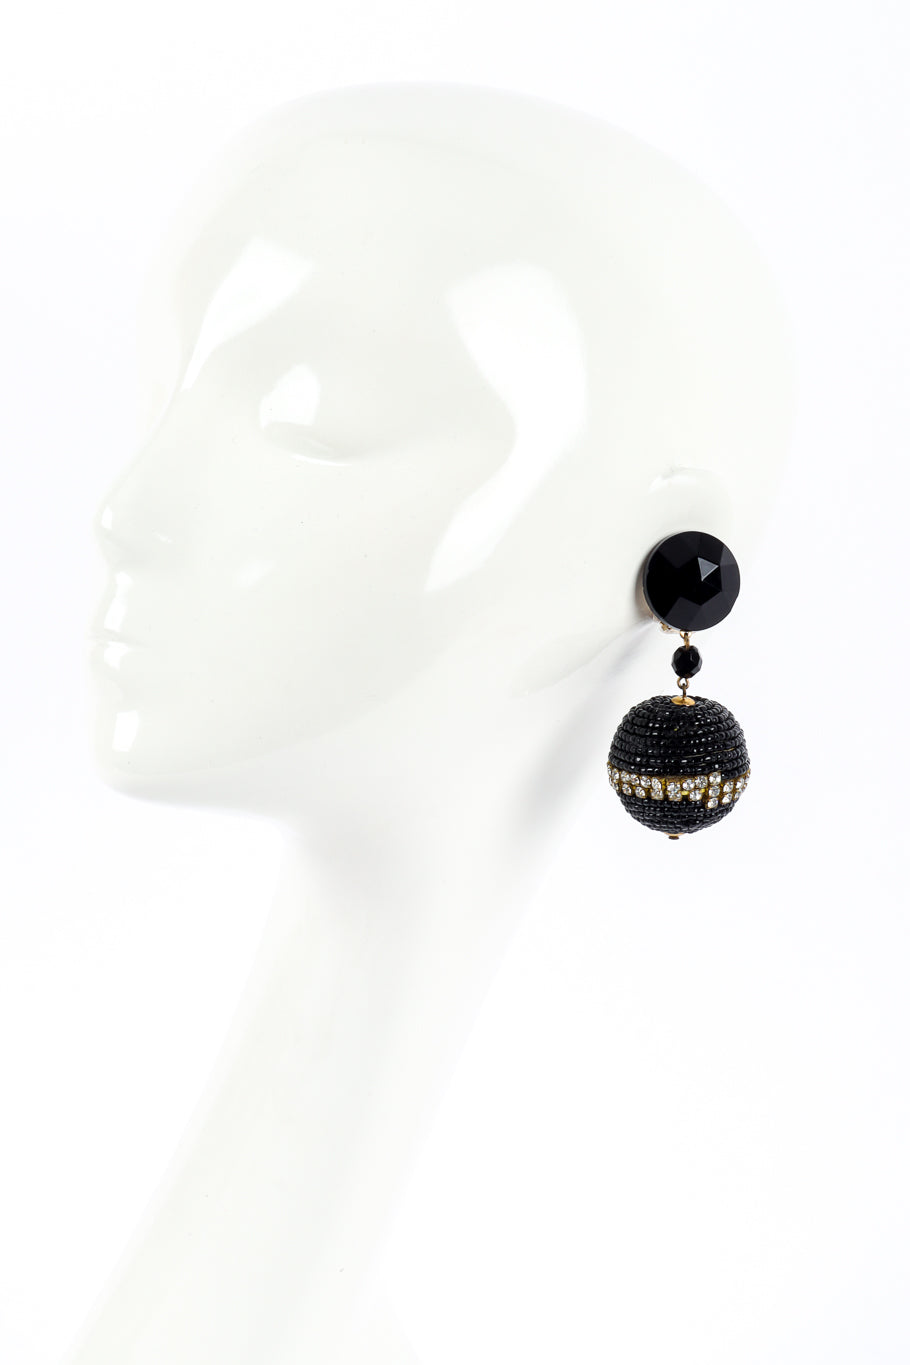 Crystal & Bead Ball Drop Earrings by Unger on mannequin head @recessla